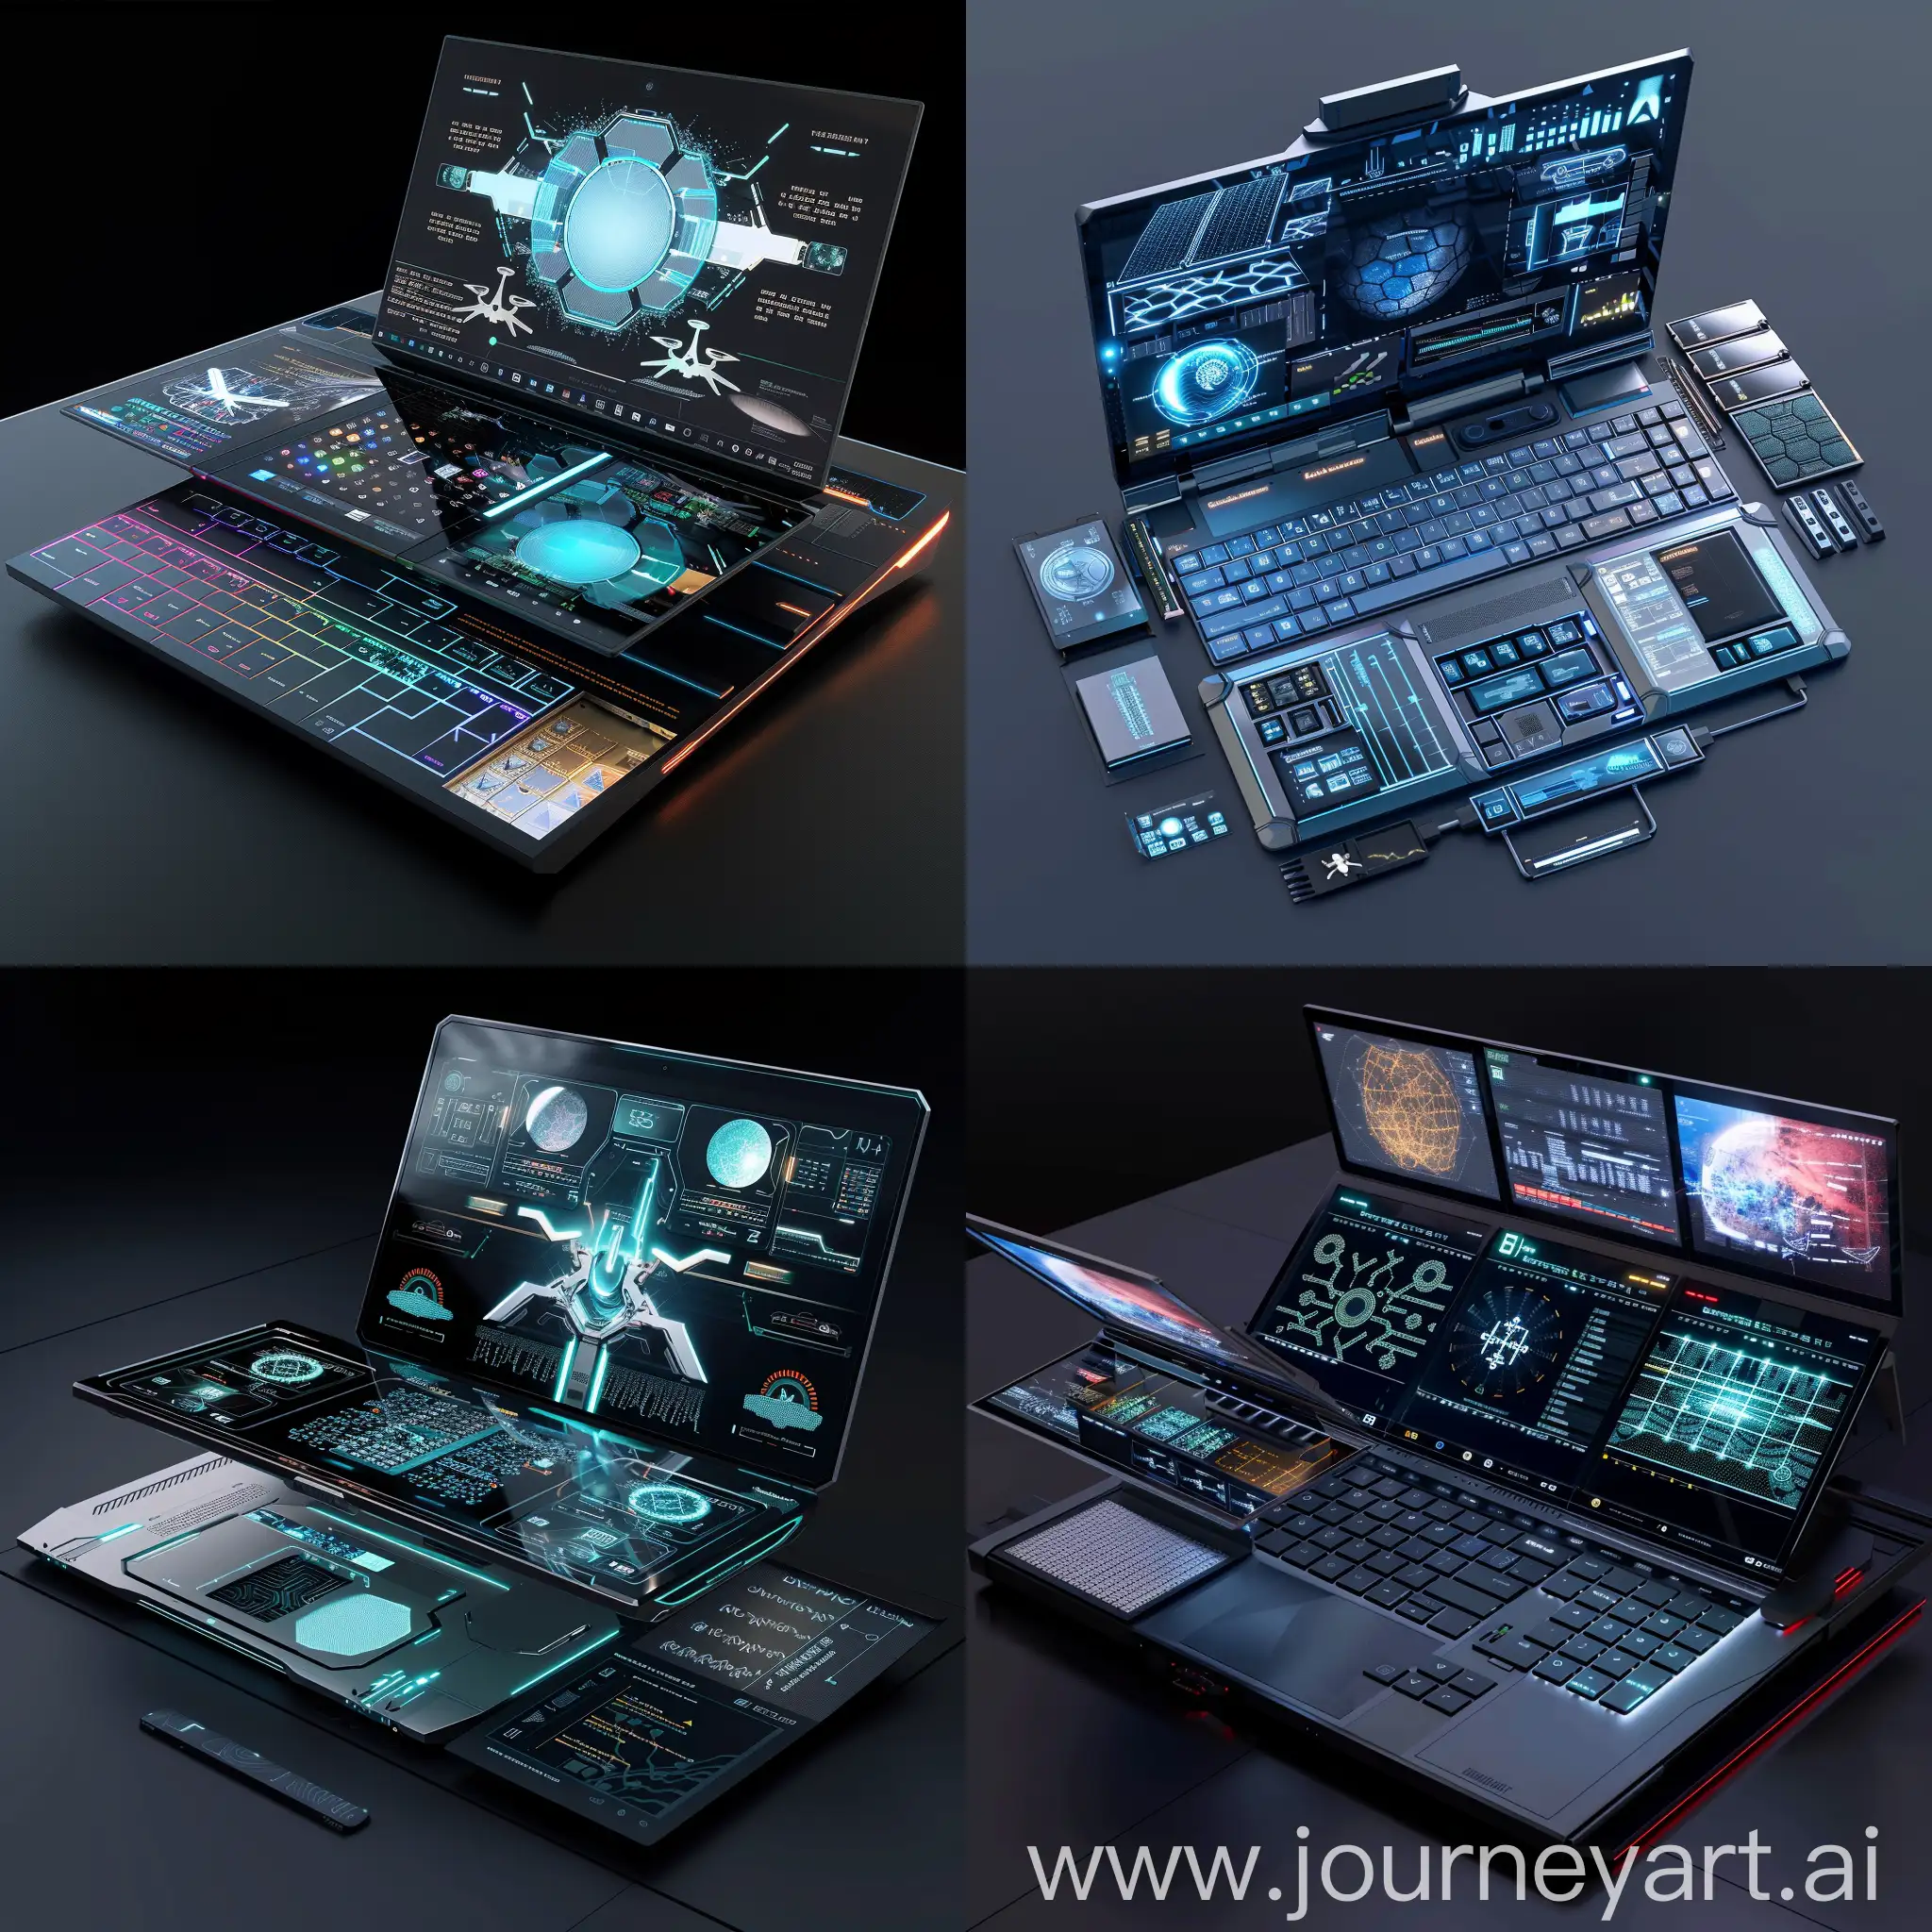 Futuristic-Quantum-Computing-Laptop-with-Holographic-Display-and-AI-Virtual-Assistant